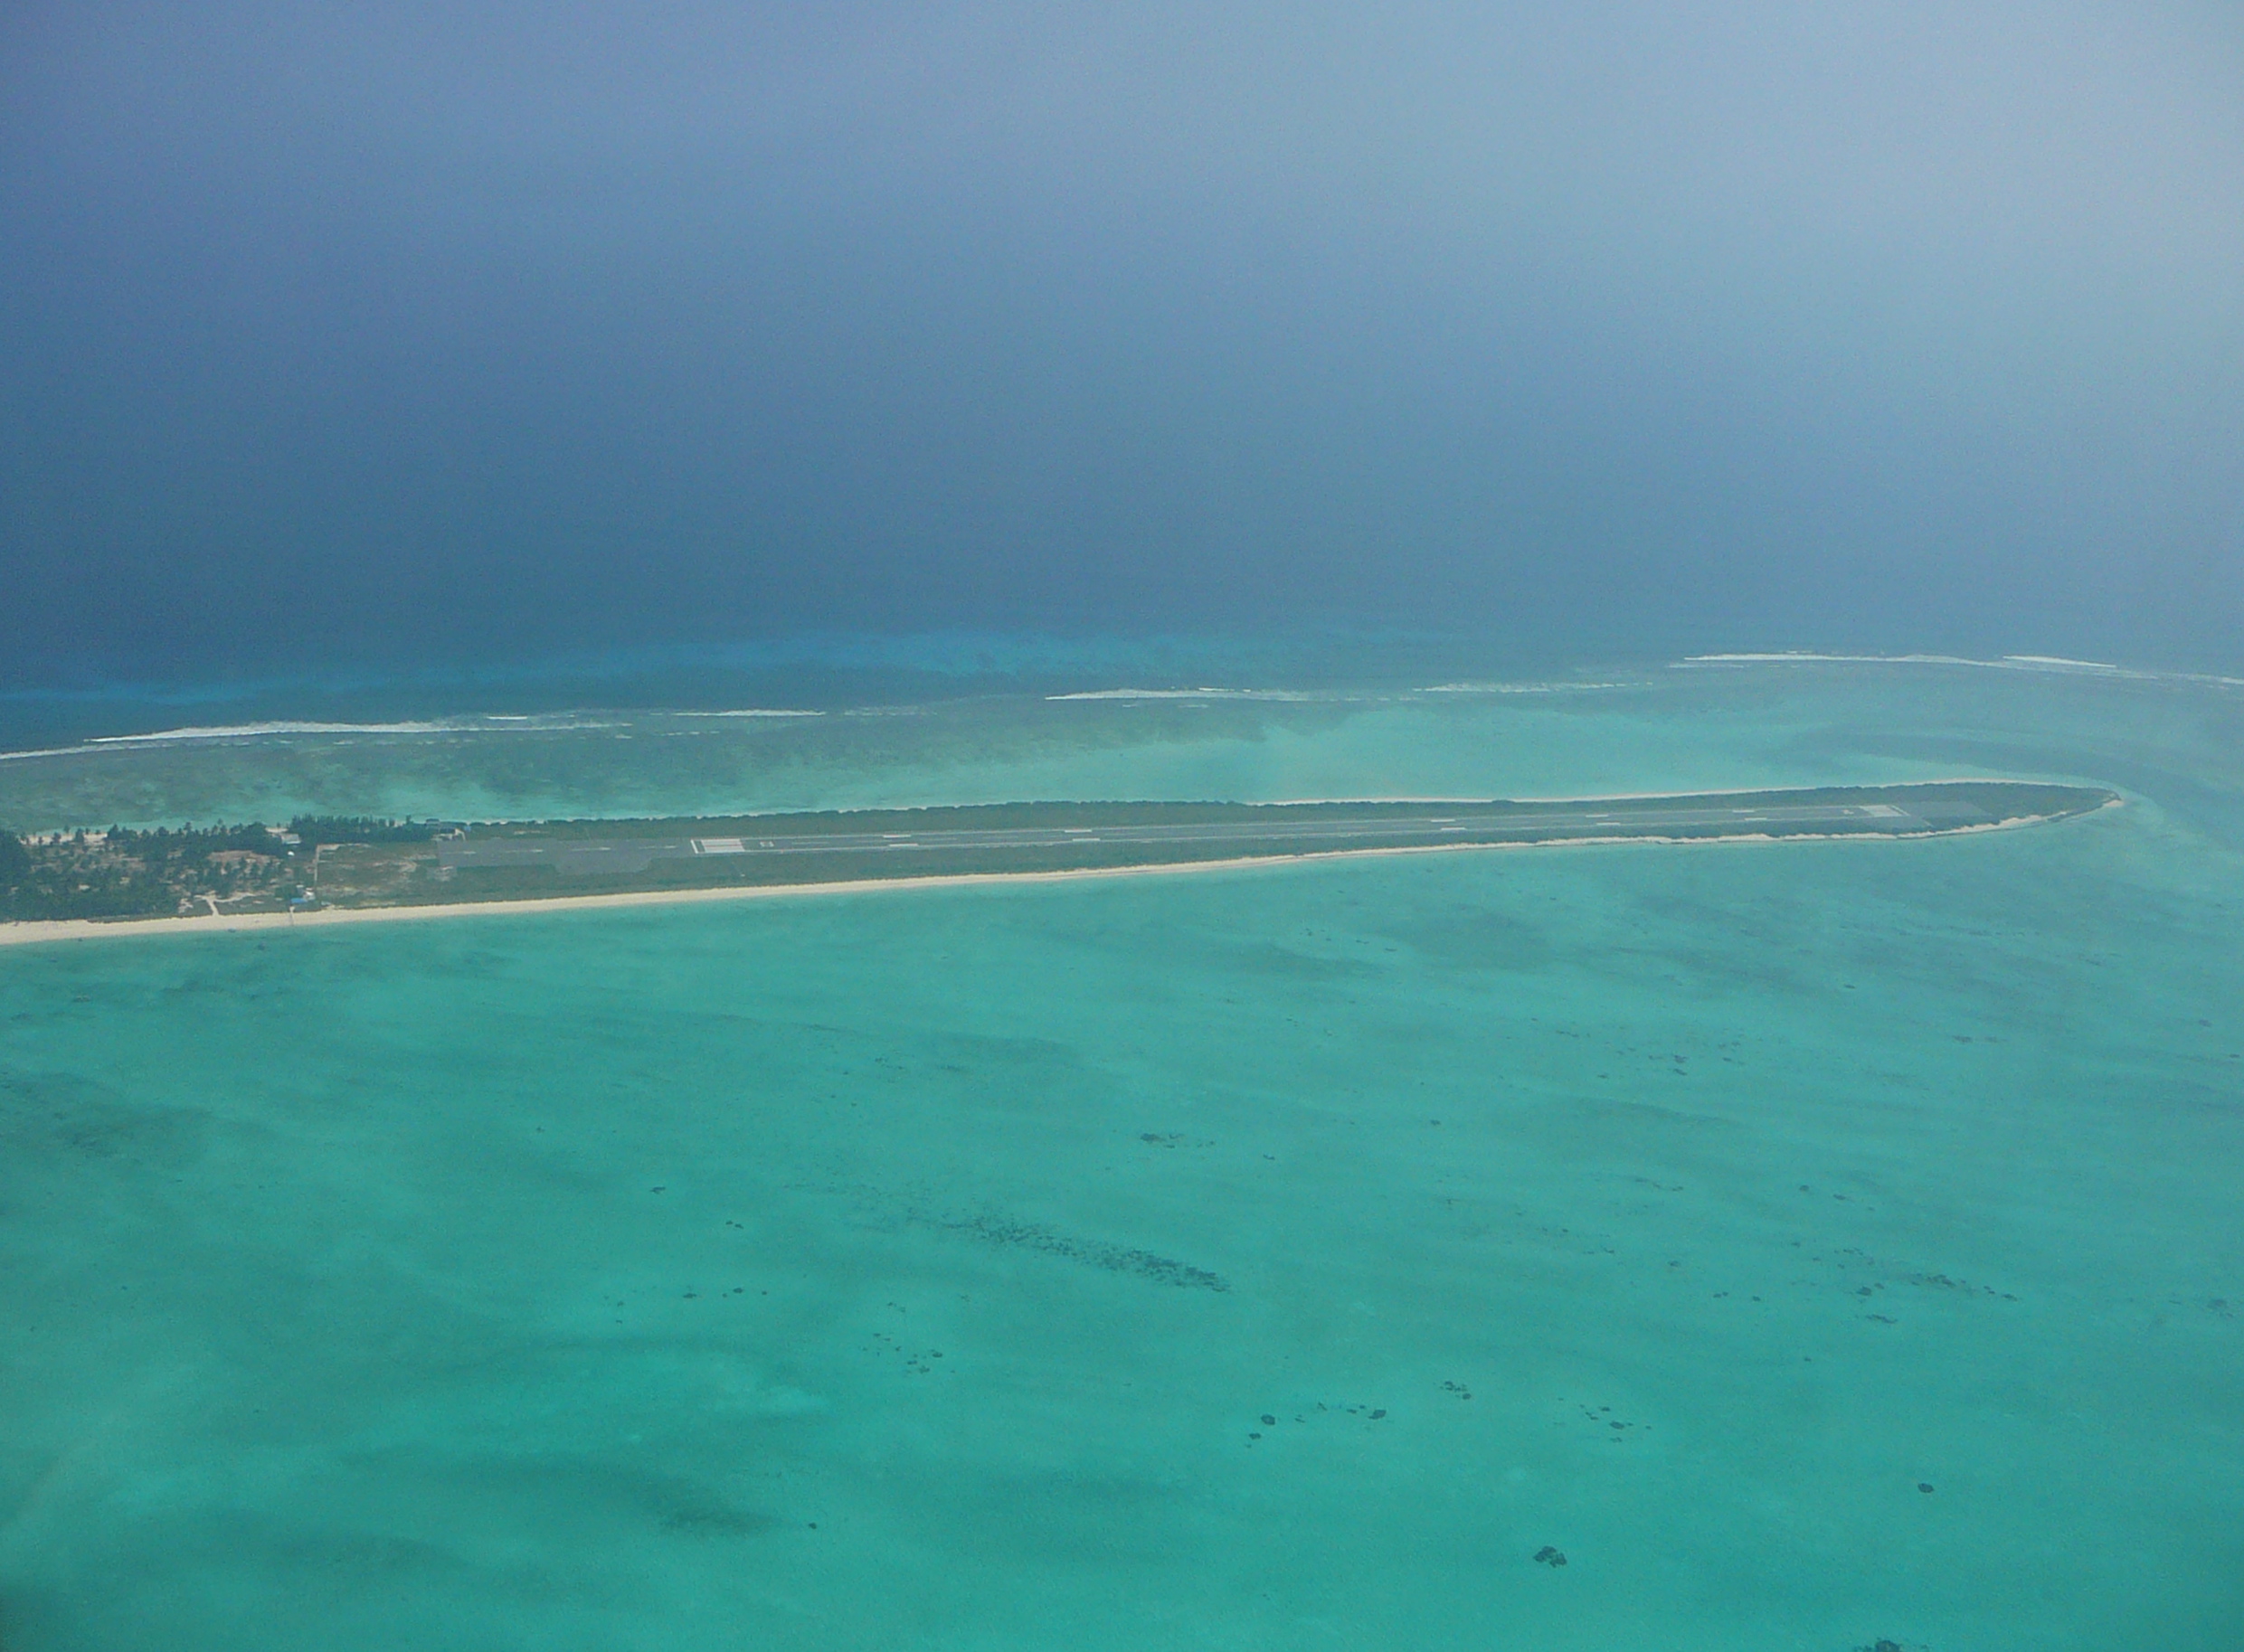 Breathtaking View Of The Agatti Airfield At Lakshadweep. BONUS: Watch A Plane Land On This Airstrip